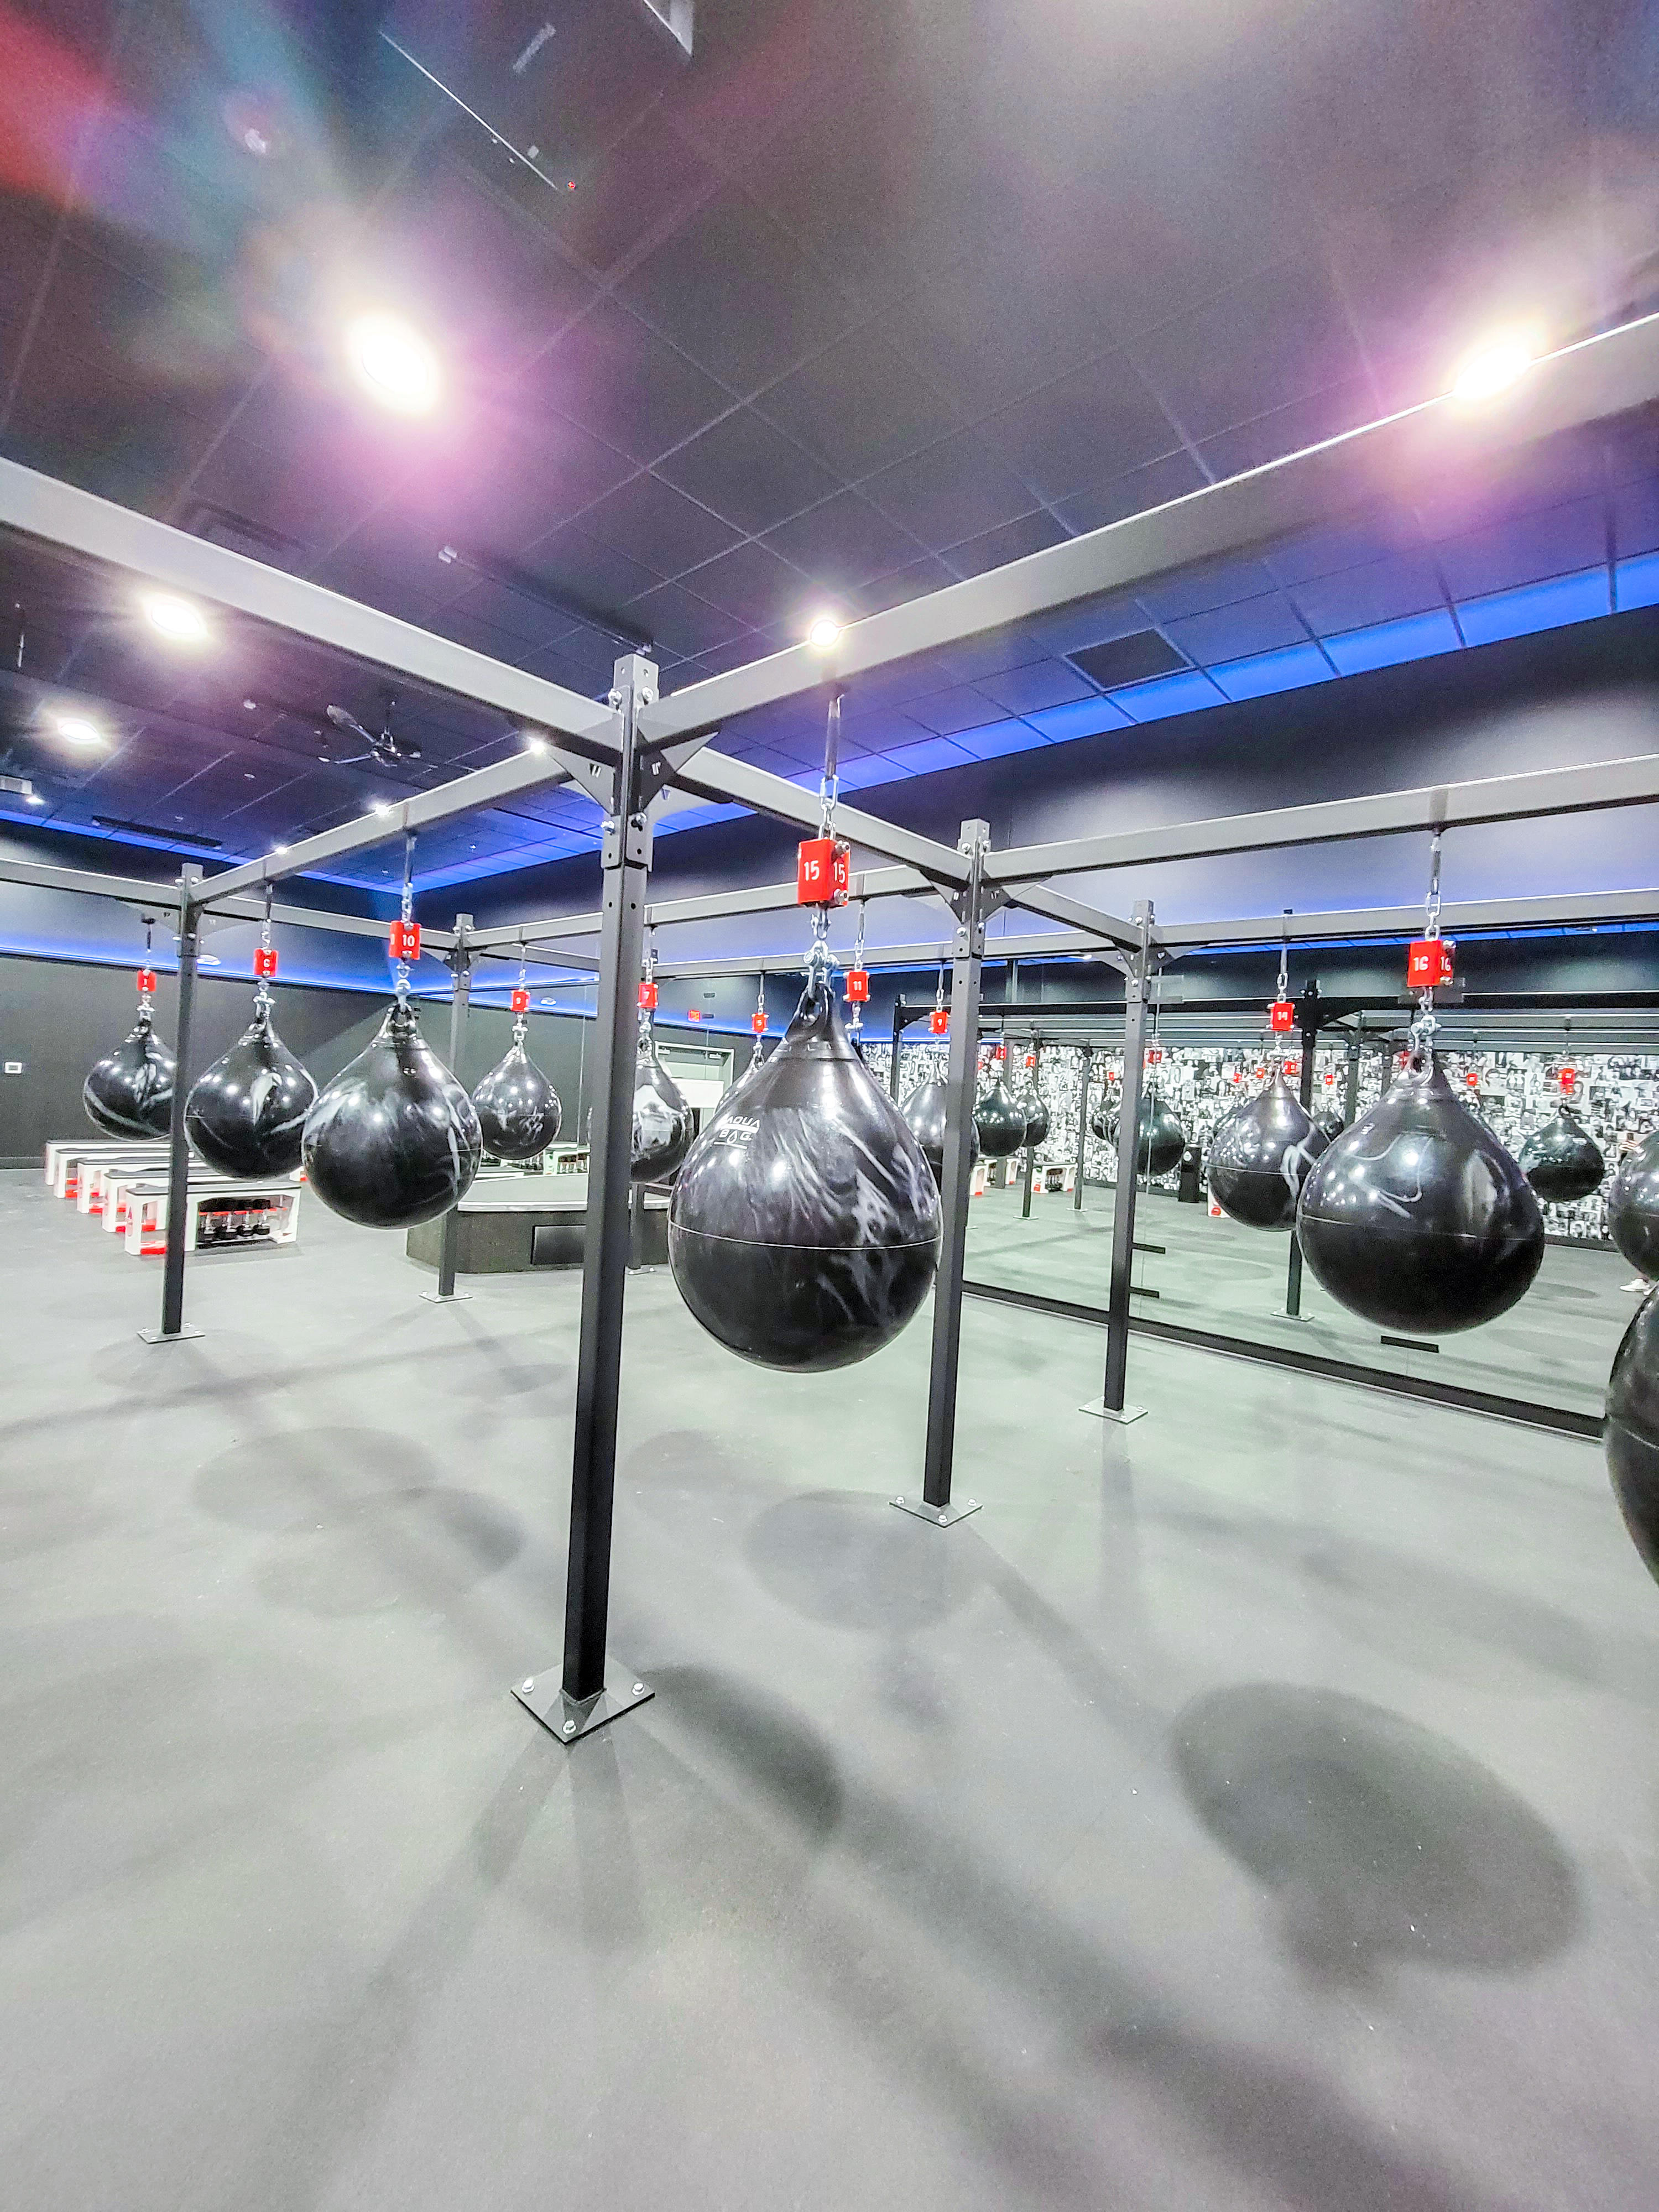 Boxing, HIIT, METCON and strength training - your ideal full-body workout destination is at Rumble B Rumble Boxing Anchorage (907)318-9009